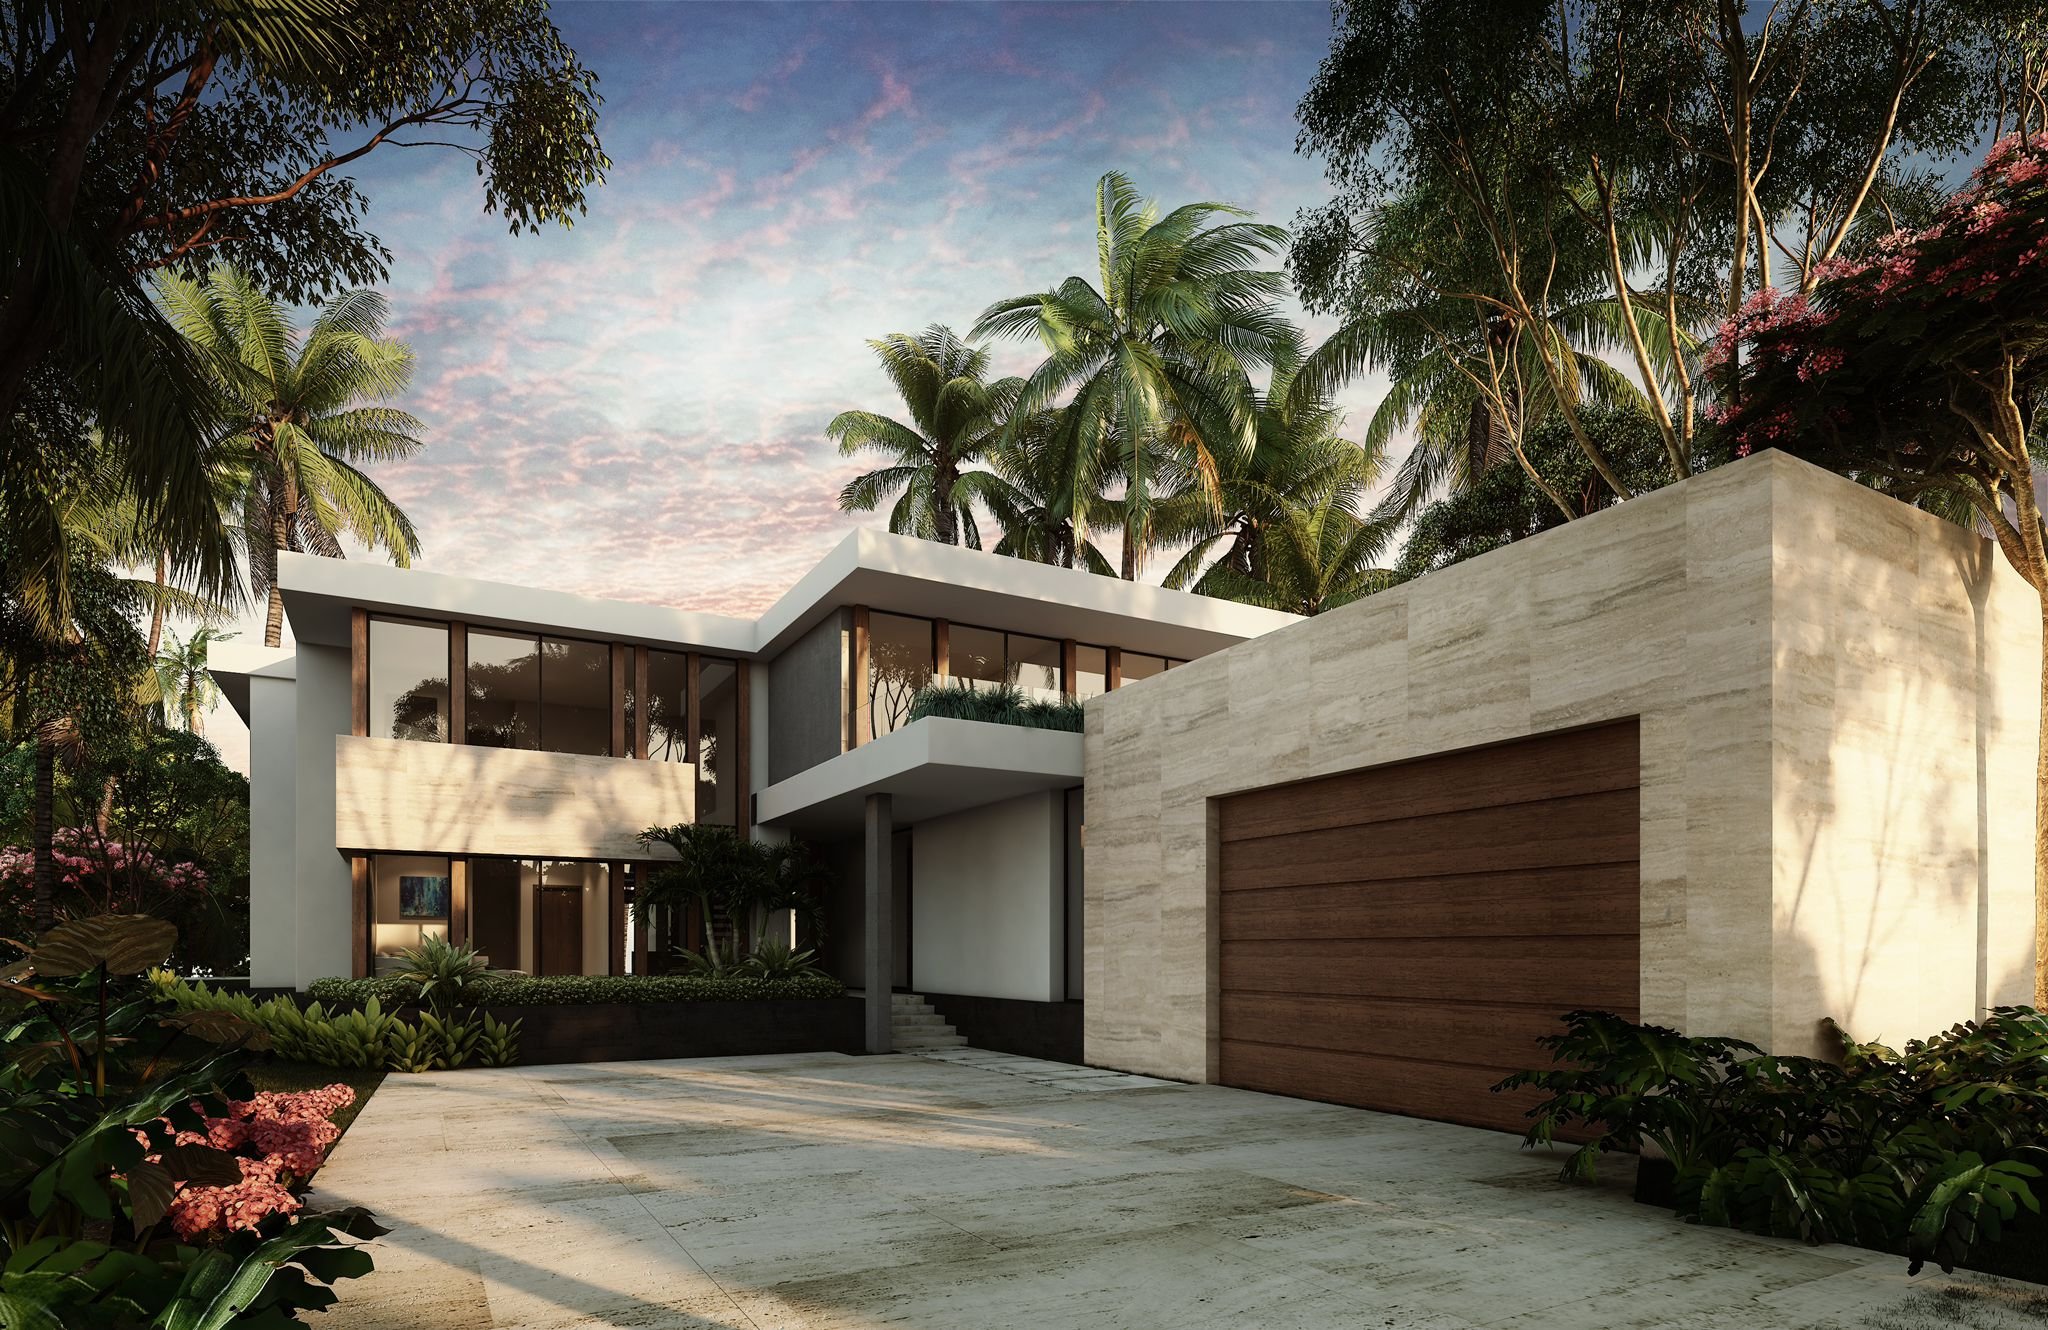 Check Out This Max Strang-Designed Venetian Islands Tropical Modern Spec Home Asking $29 Million 8.JPG